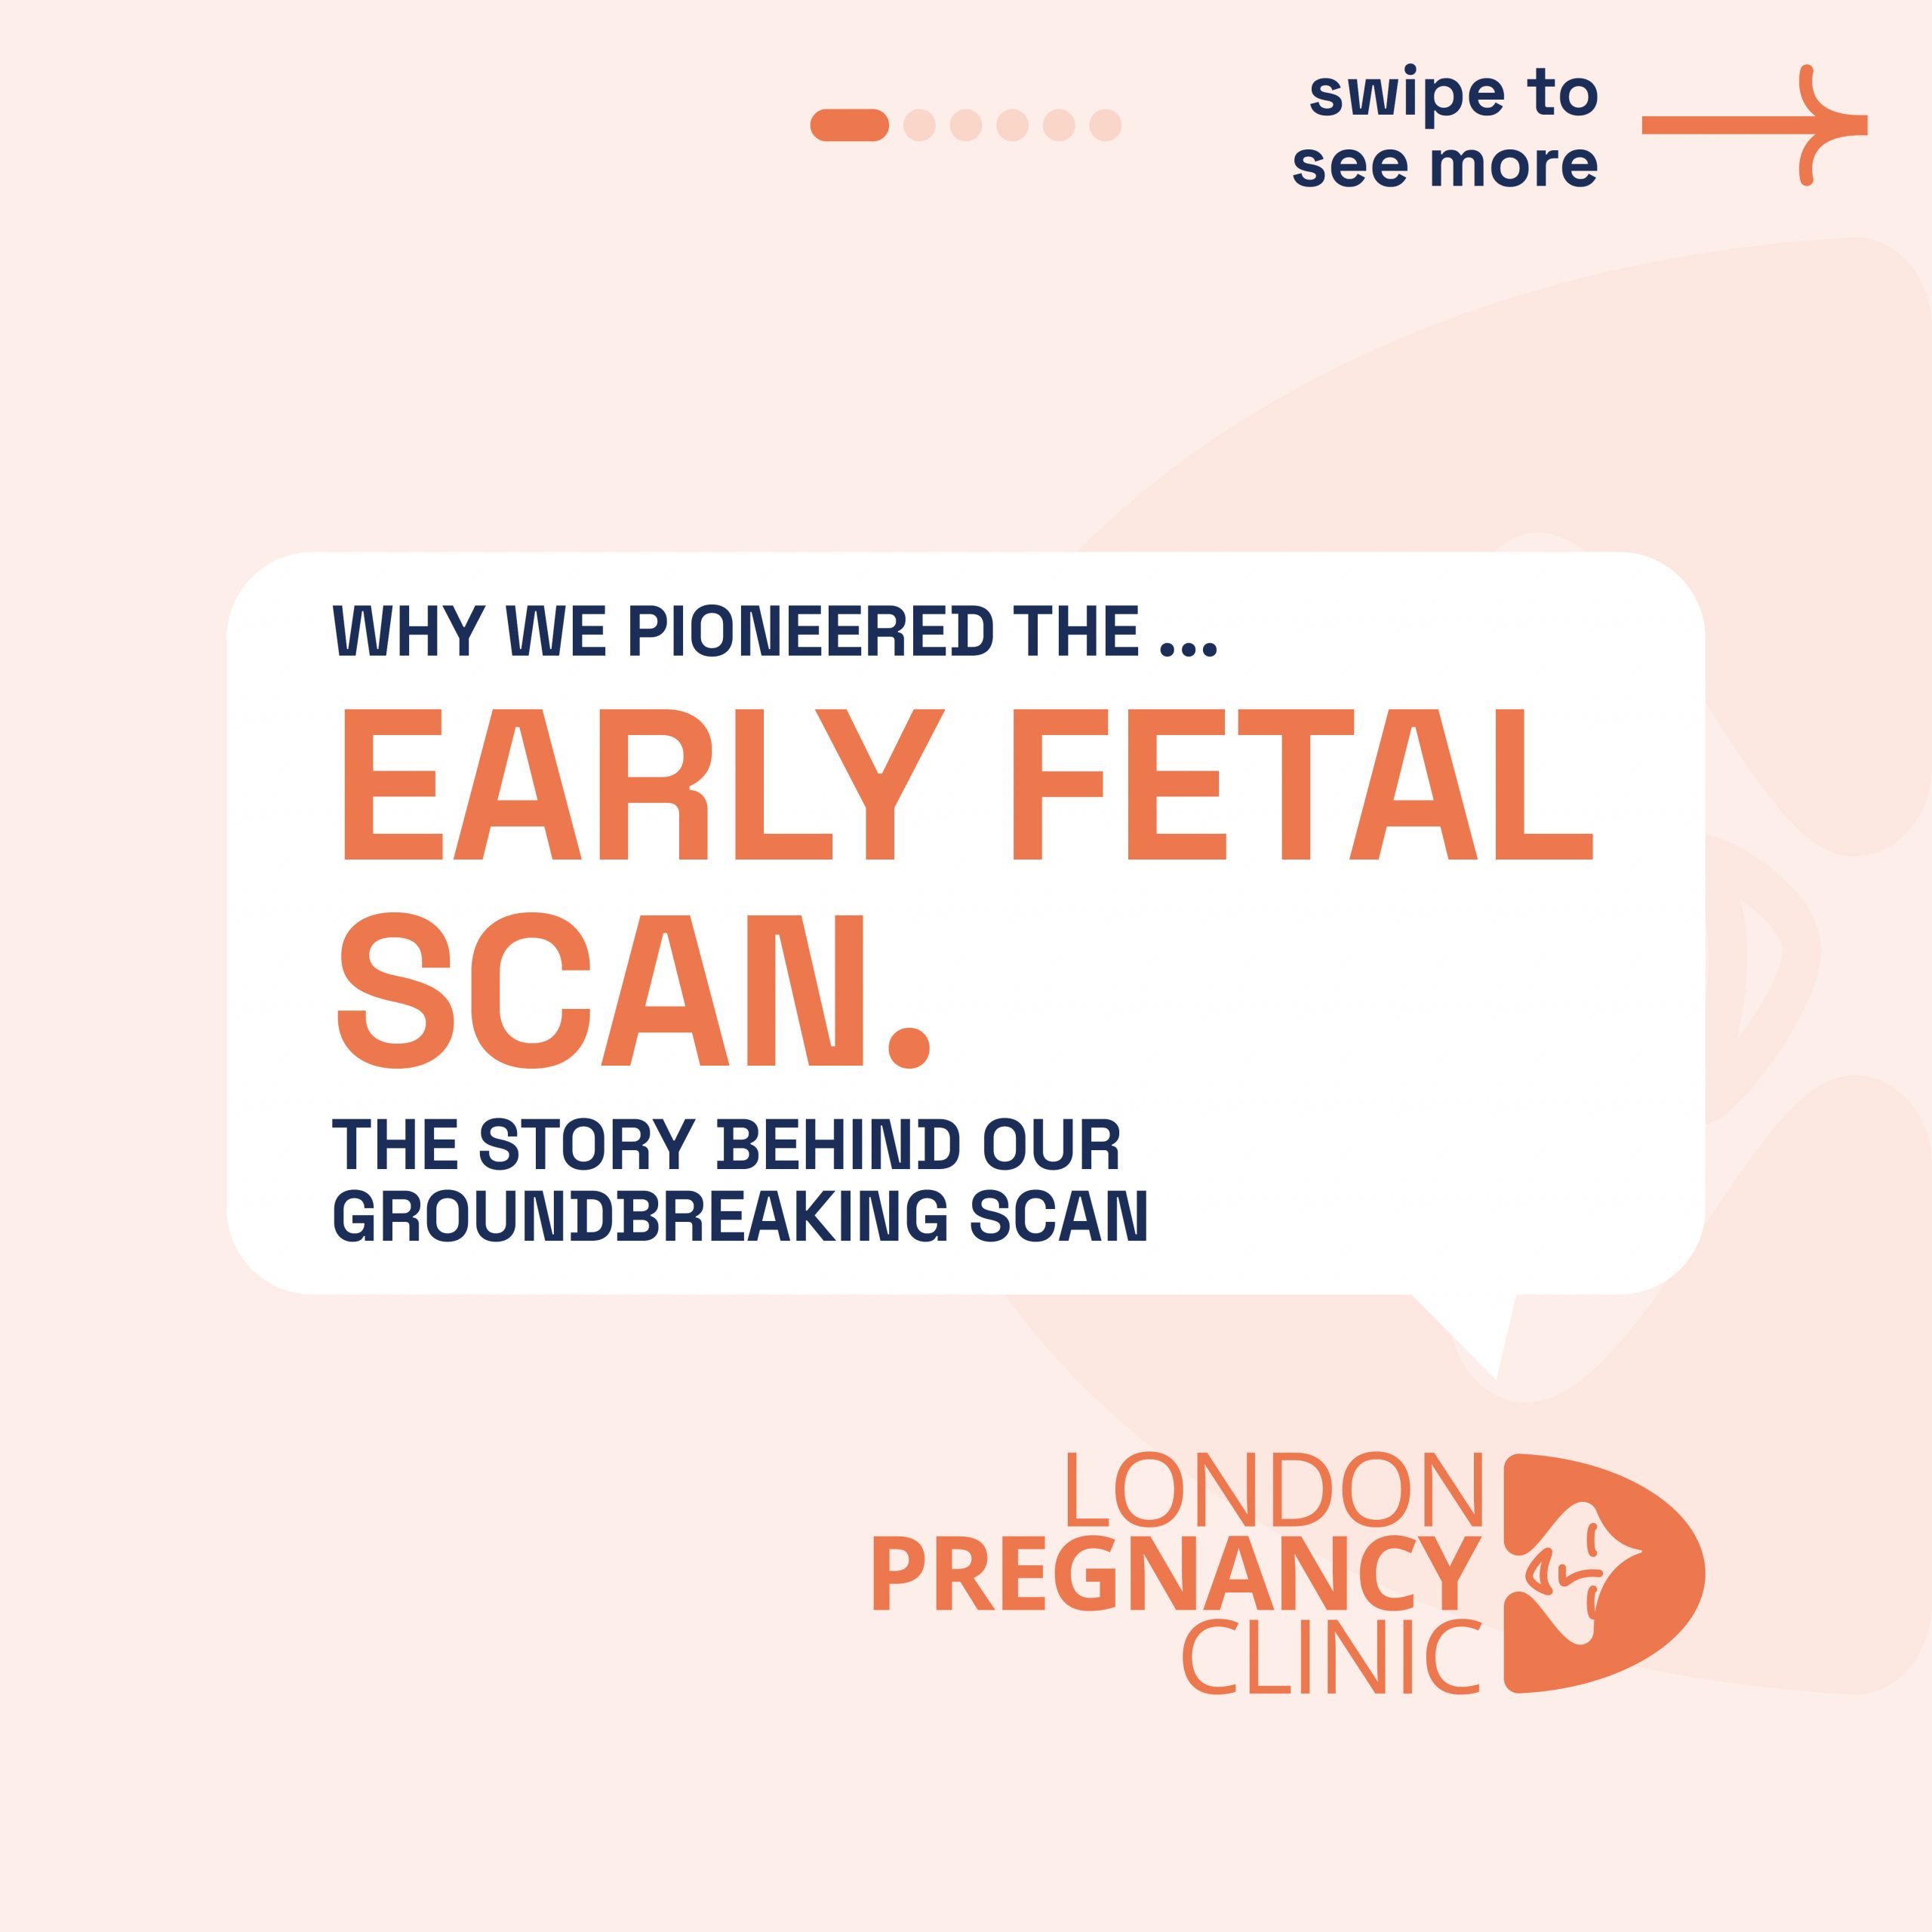 Promotional graphic from London Pregnancy Clinic on pioneering the Early Fetal Scan and the story behind this groundbreaking scan